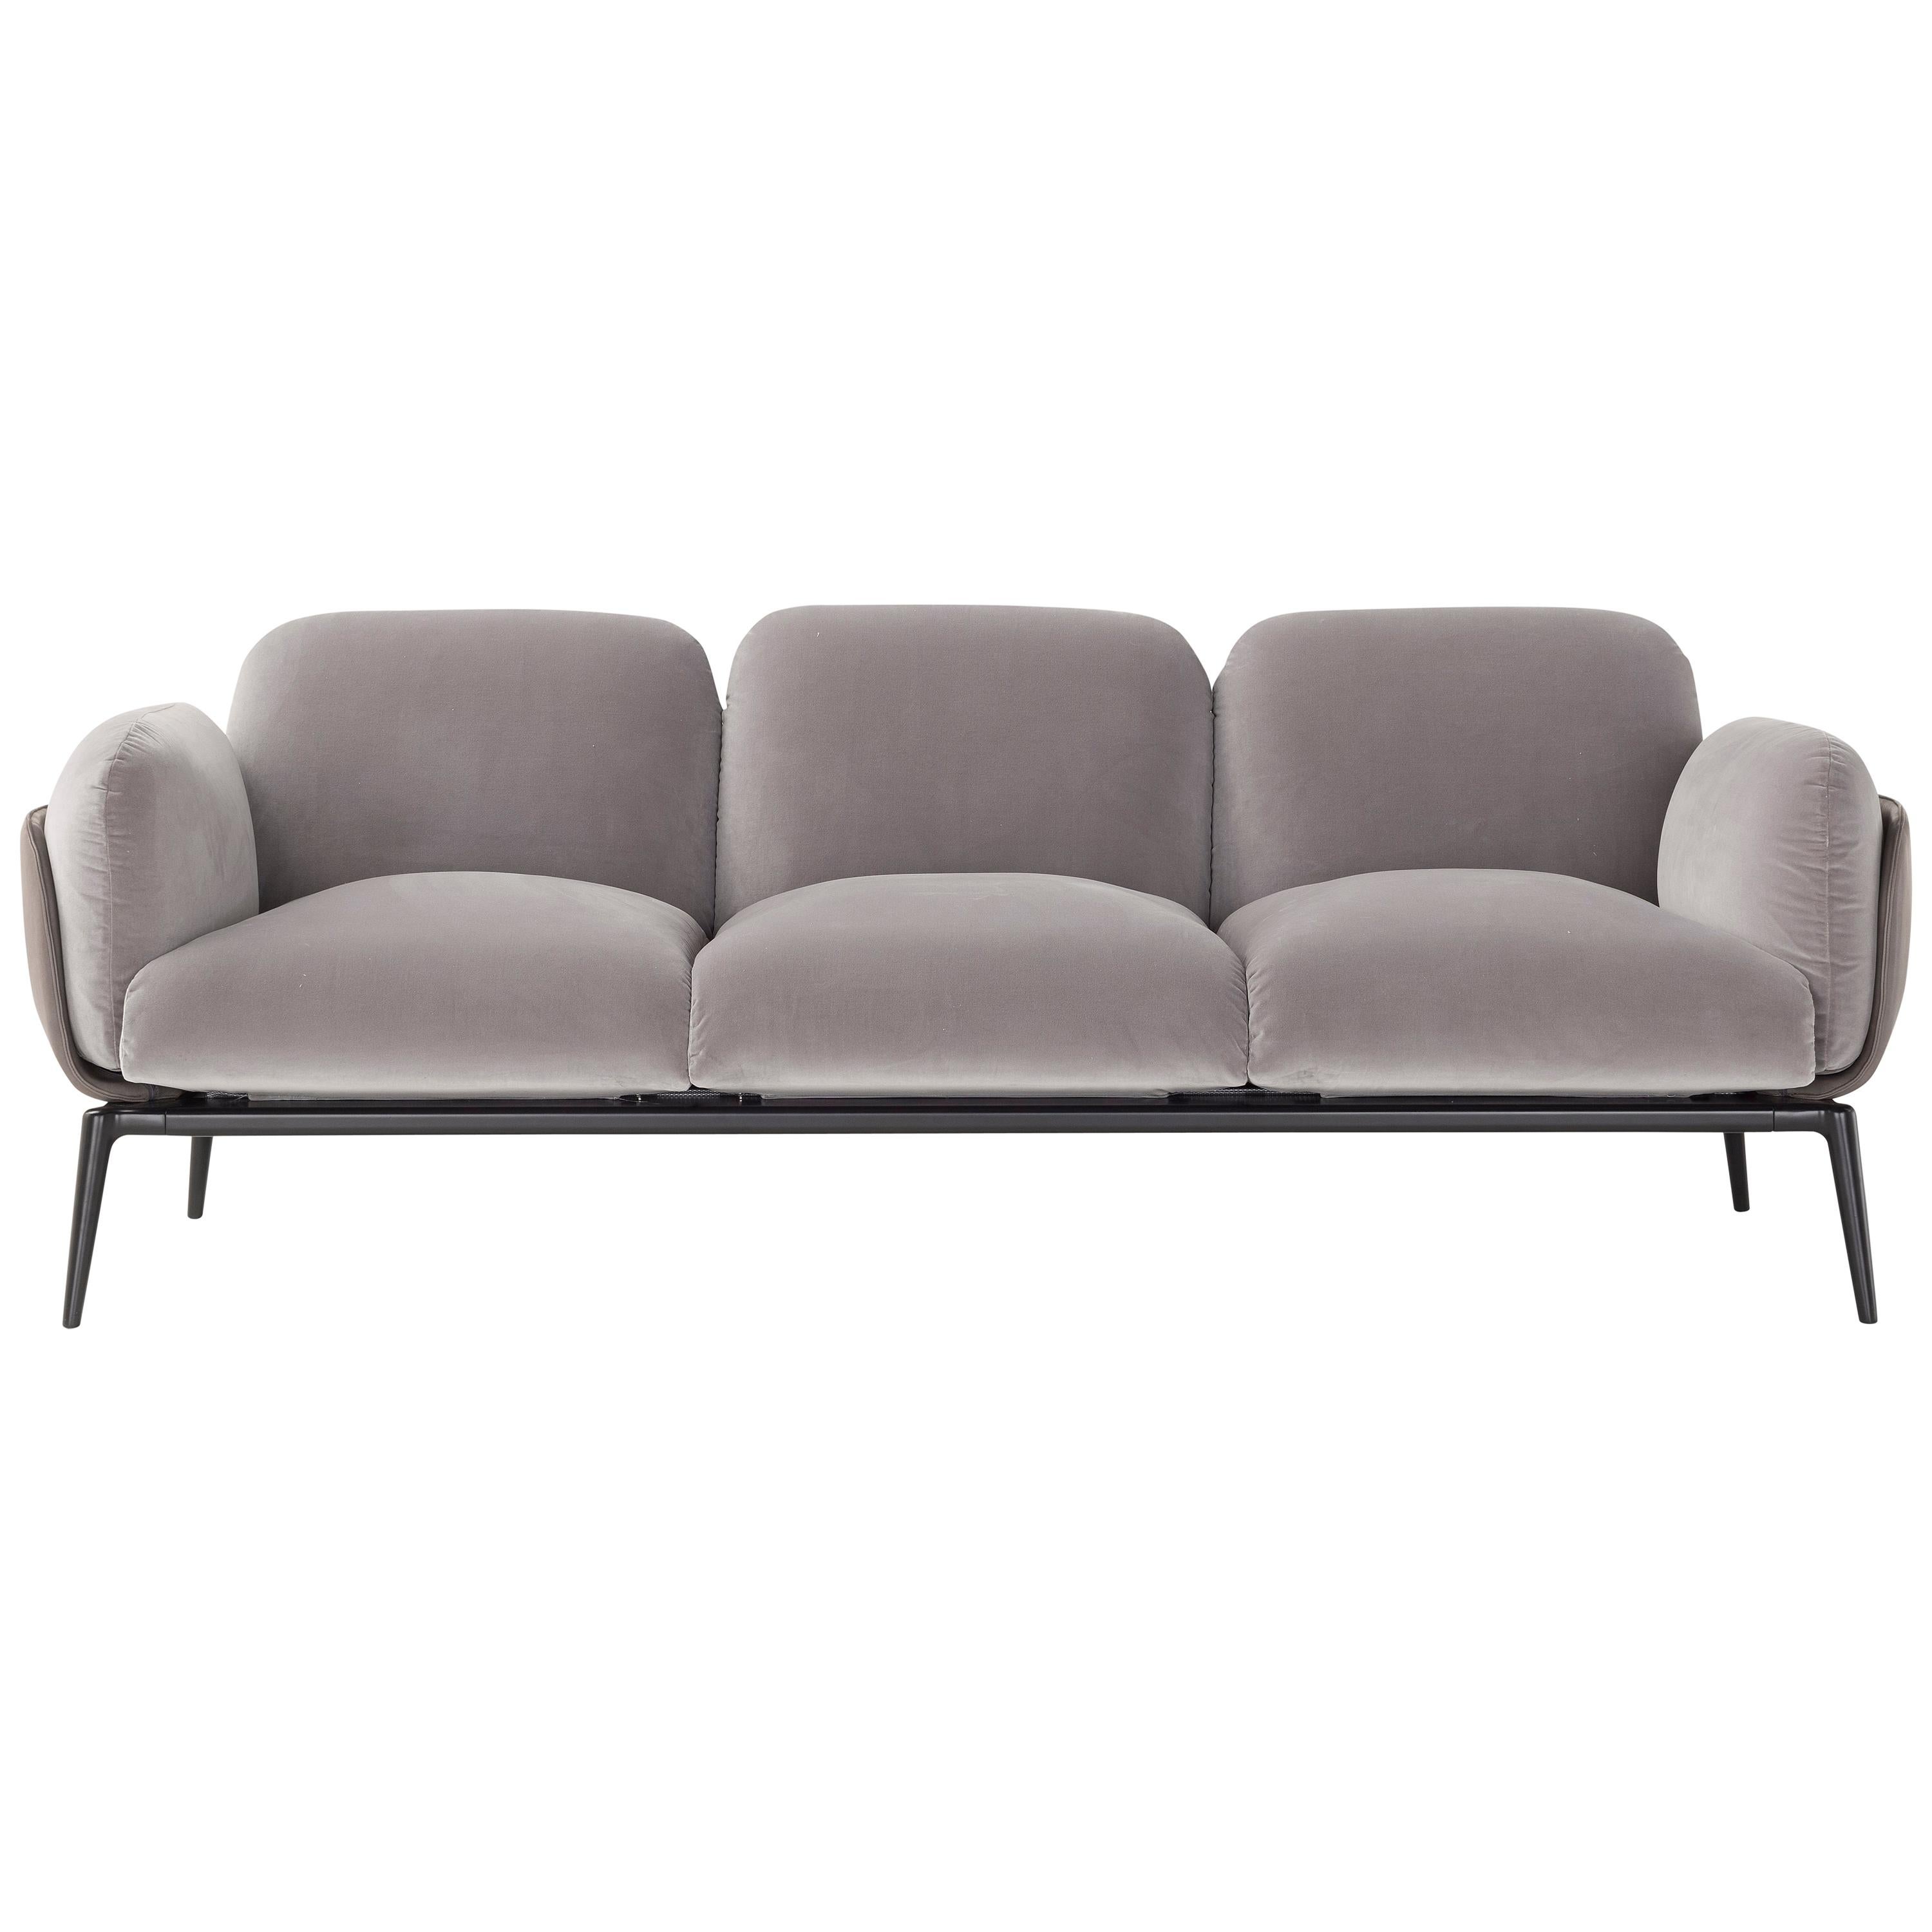 Amura 'Brooklyn' Sofa in Grey Velvet and Leather by Stefano Bigi For Sale